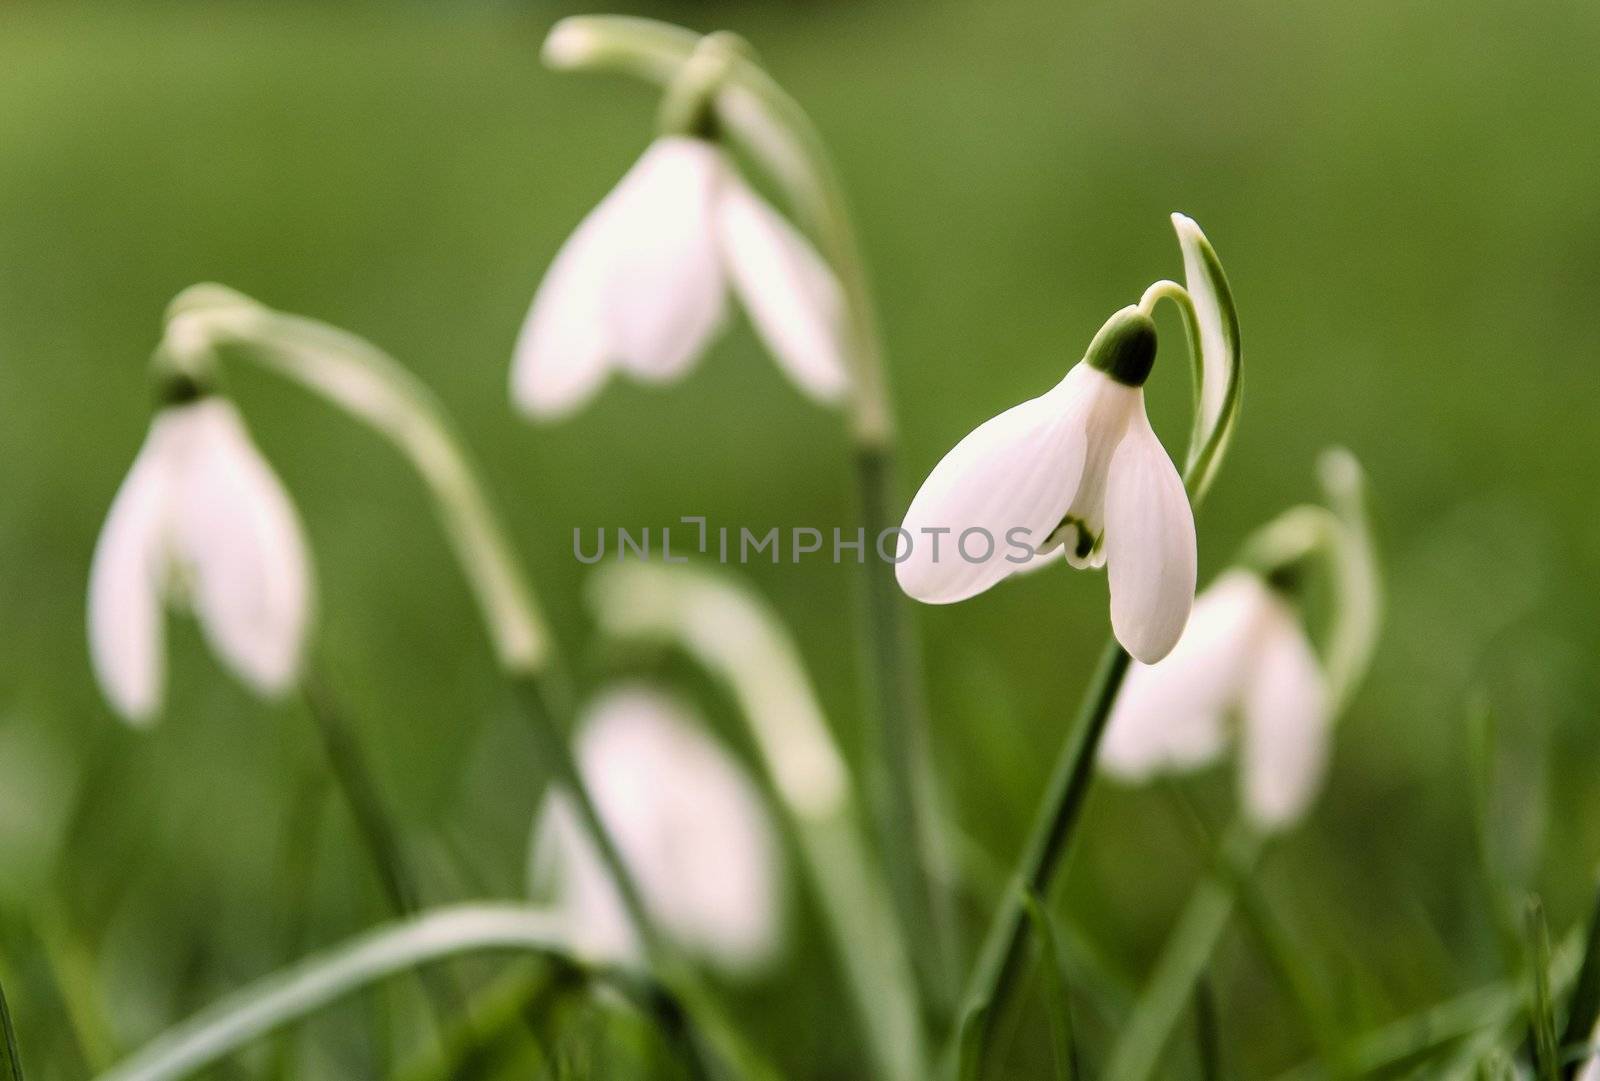 Snowdrops by Jez22